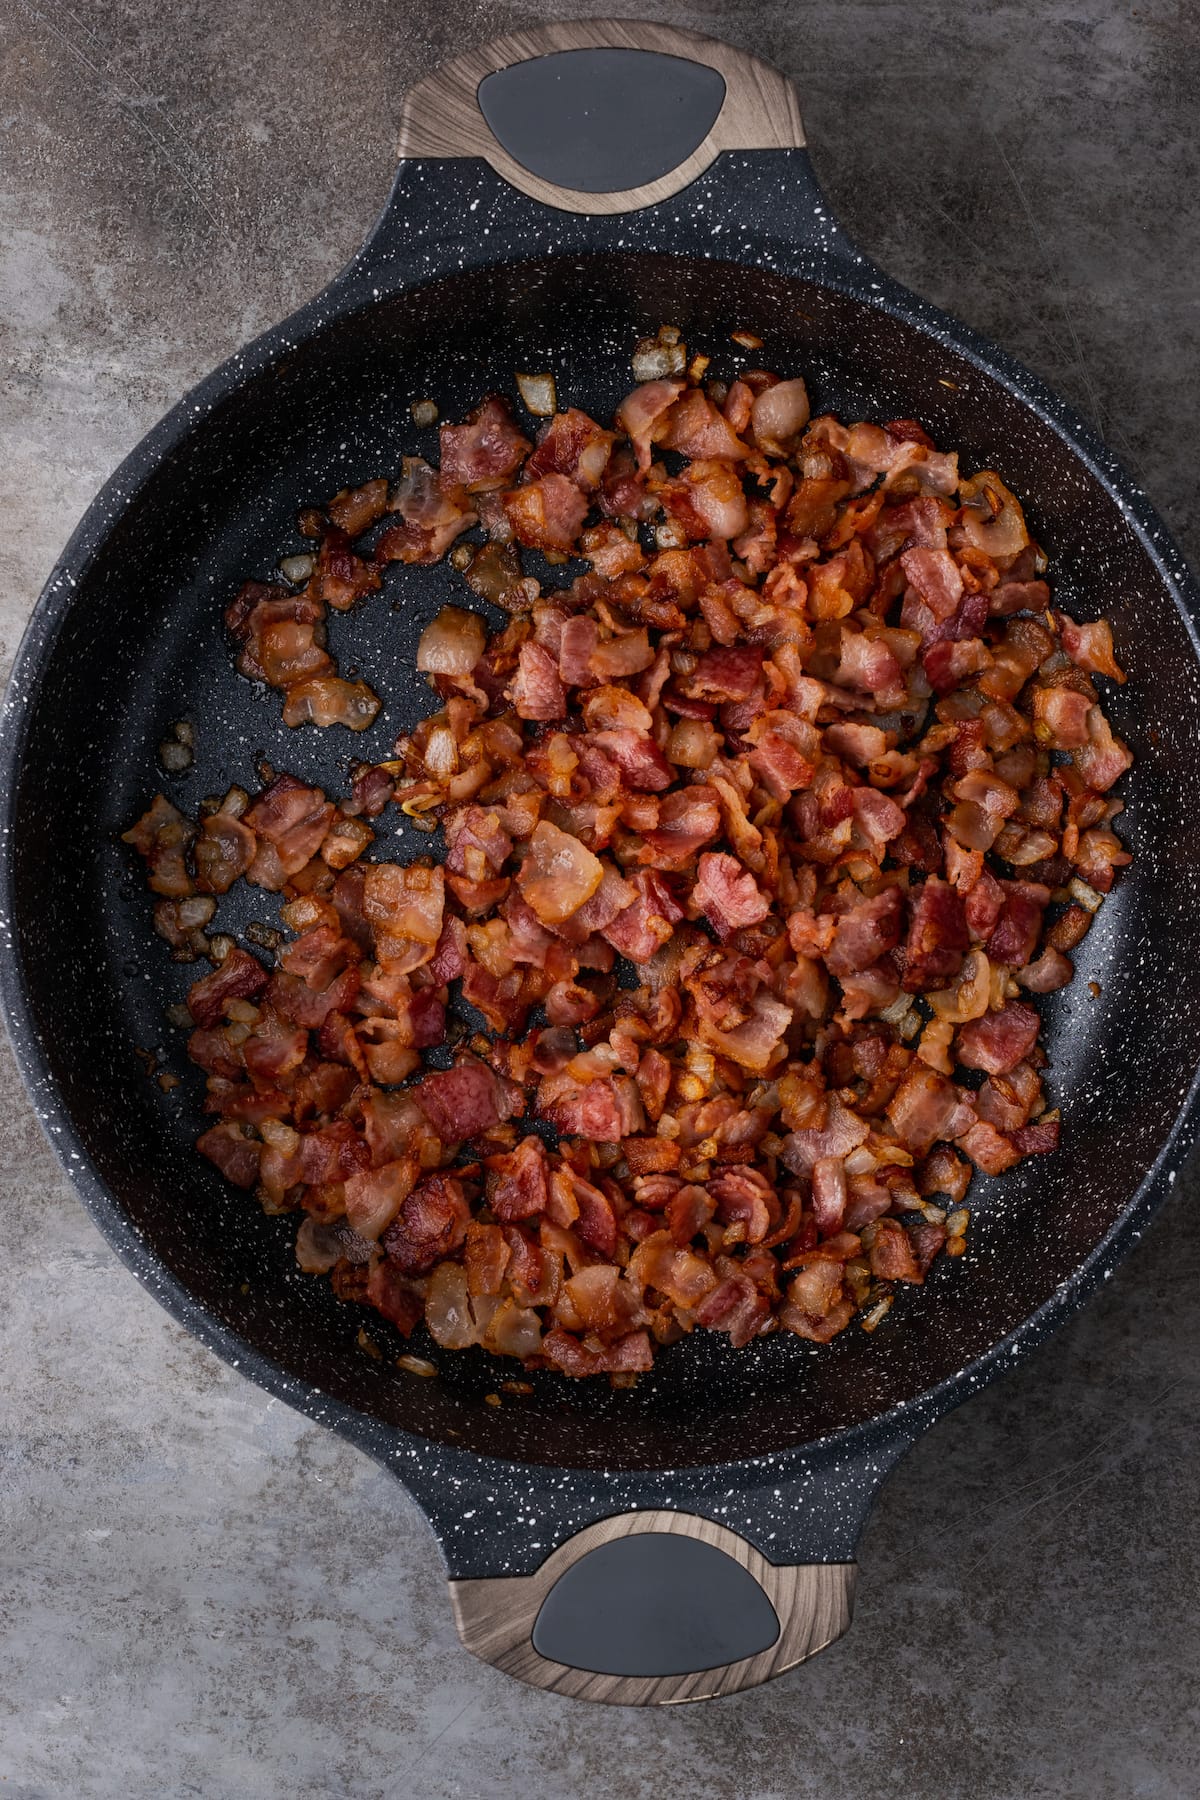 Caramelized onion and bacon in a cast iron skillet.